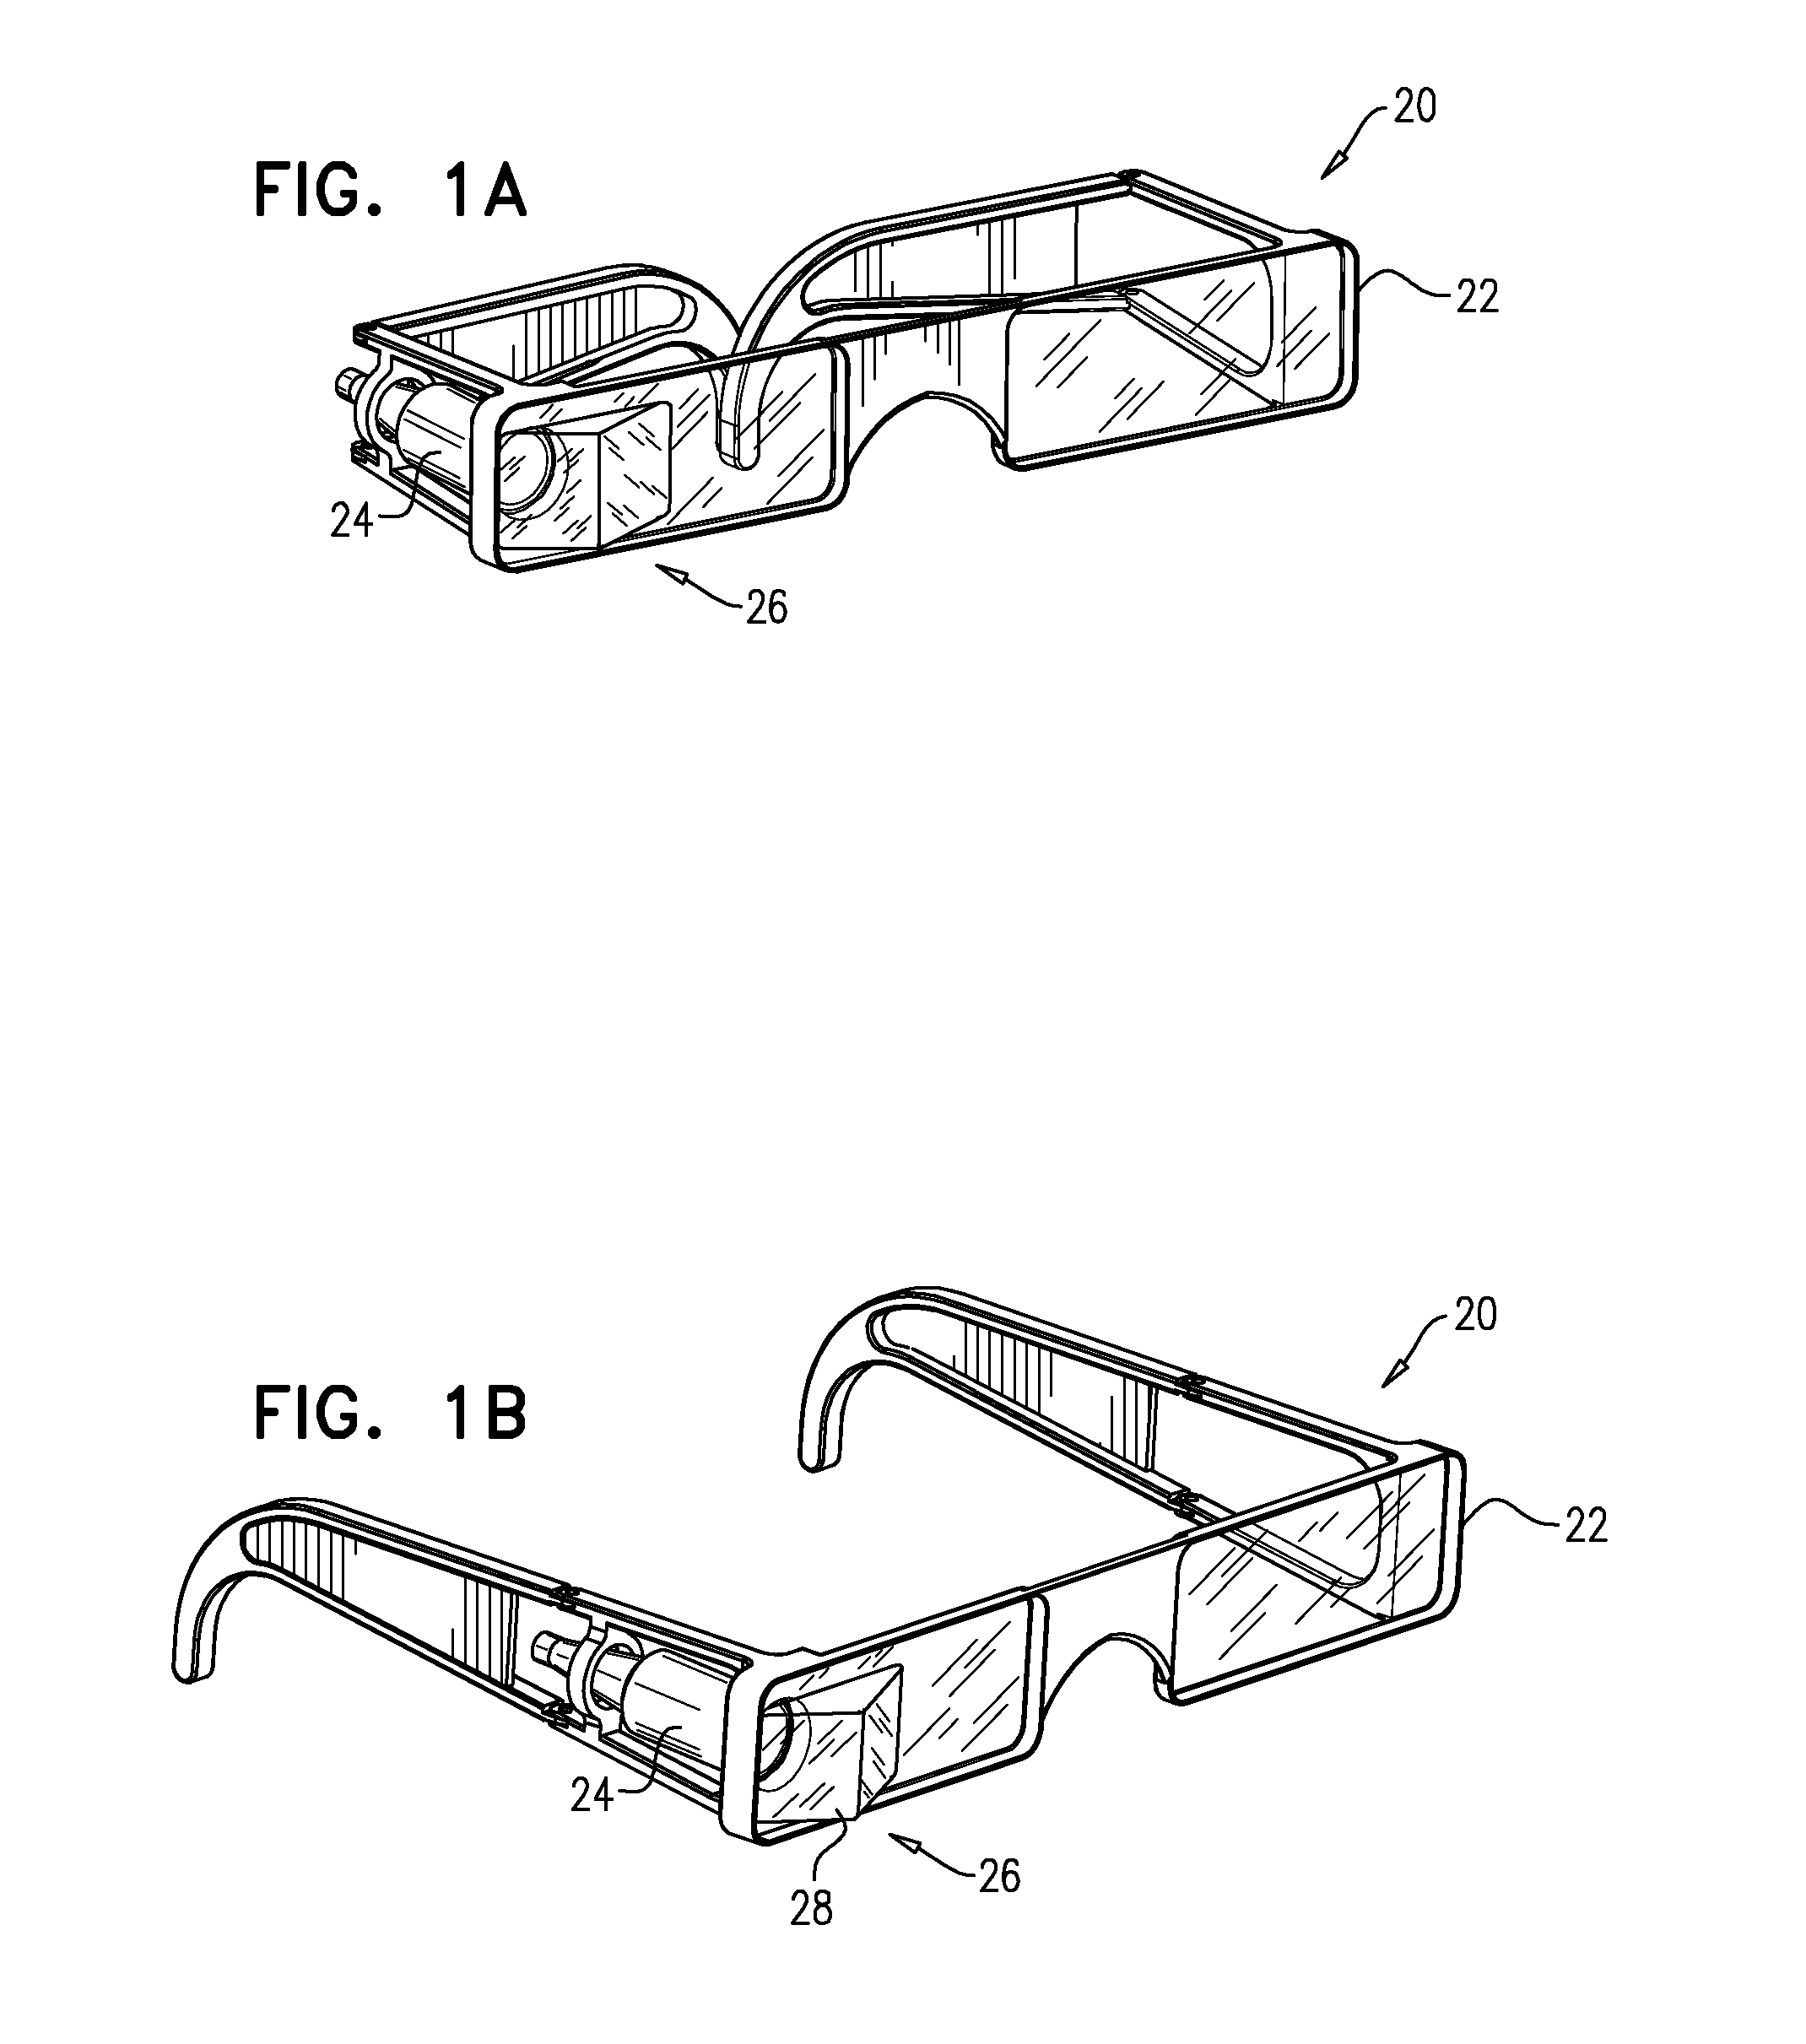 Wearable apparatus for delivery of power to a retinal prosthesis